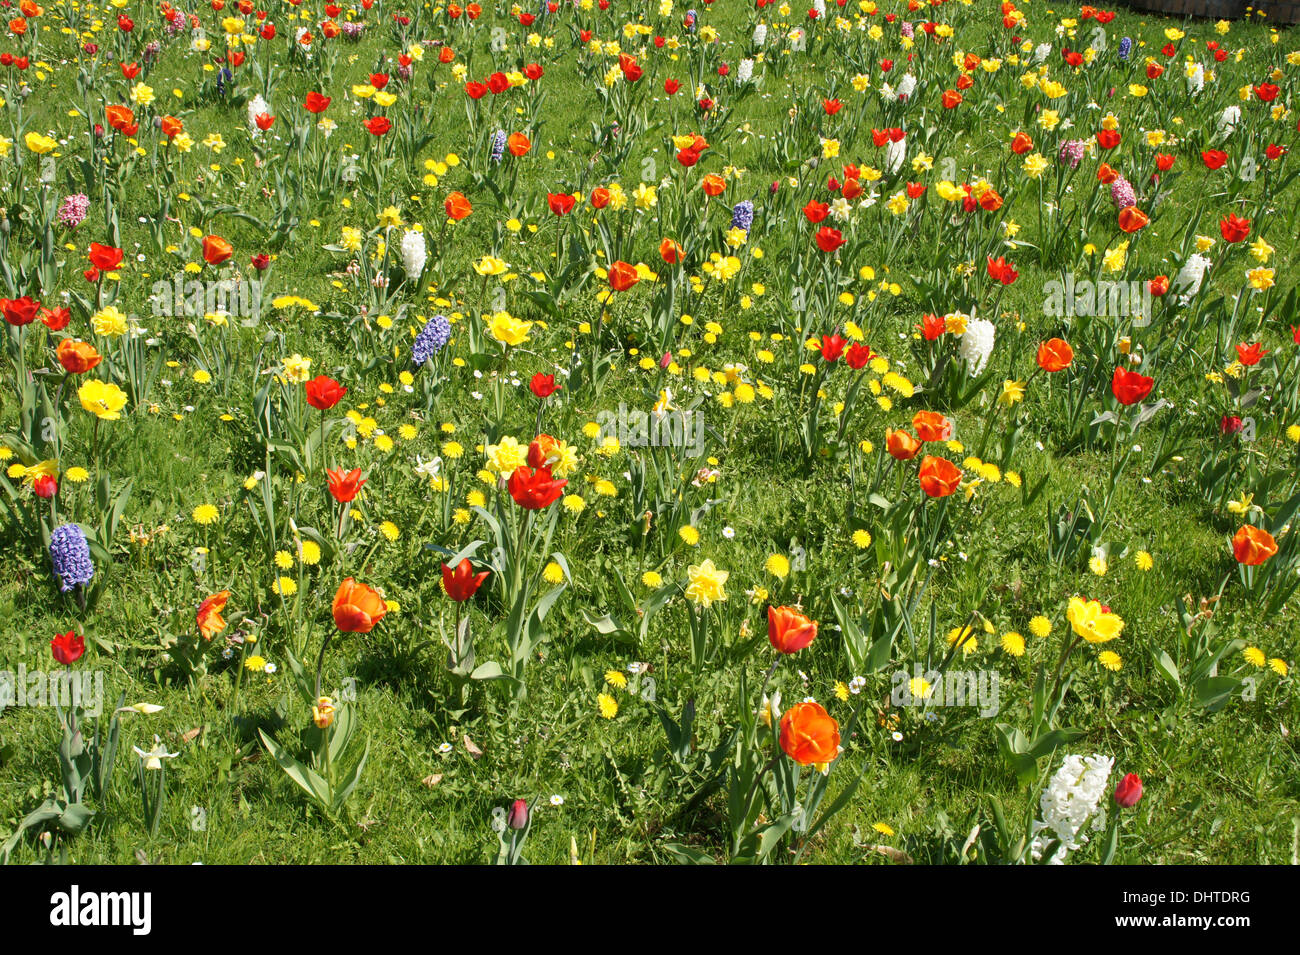 Lawn with Bulb-Flowers Stock Photo